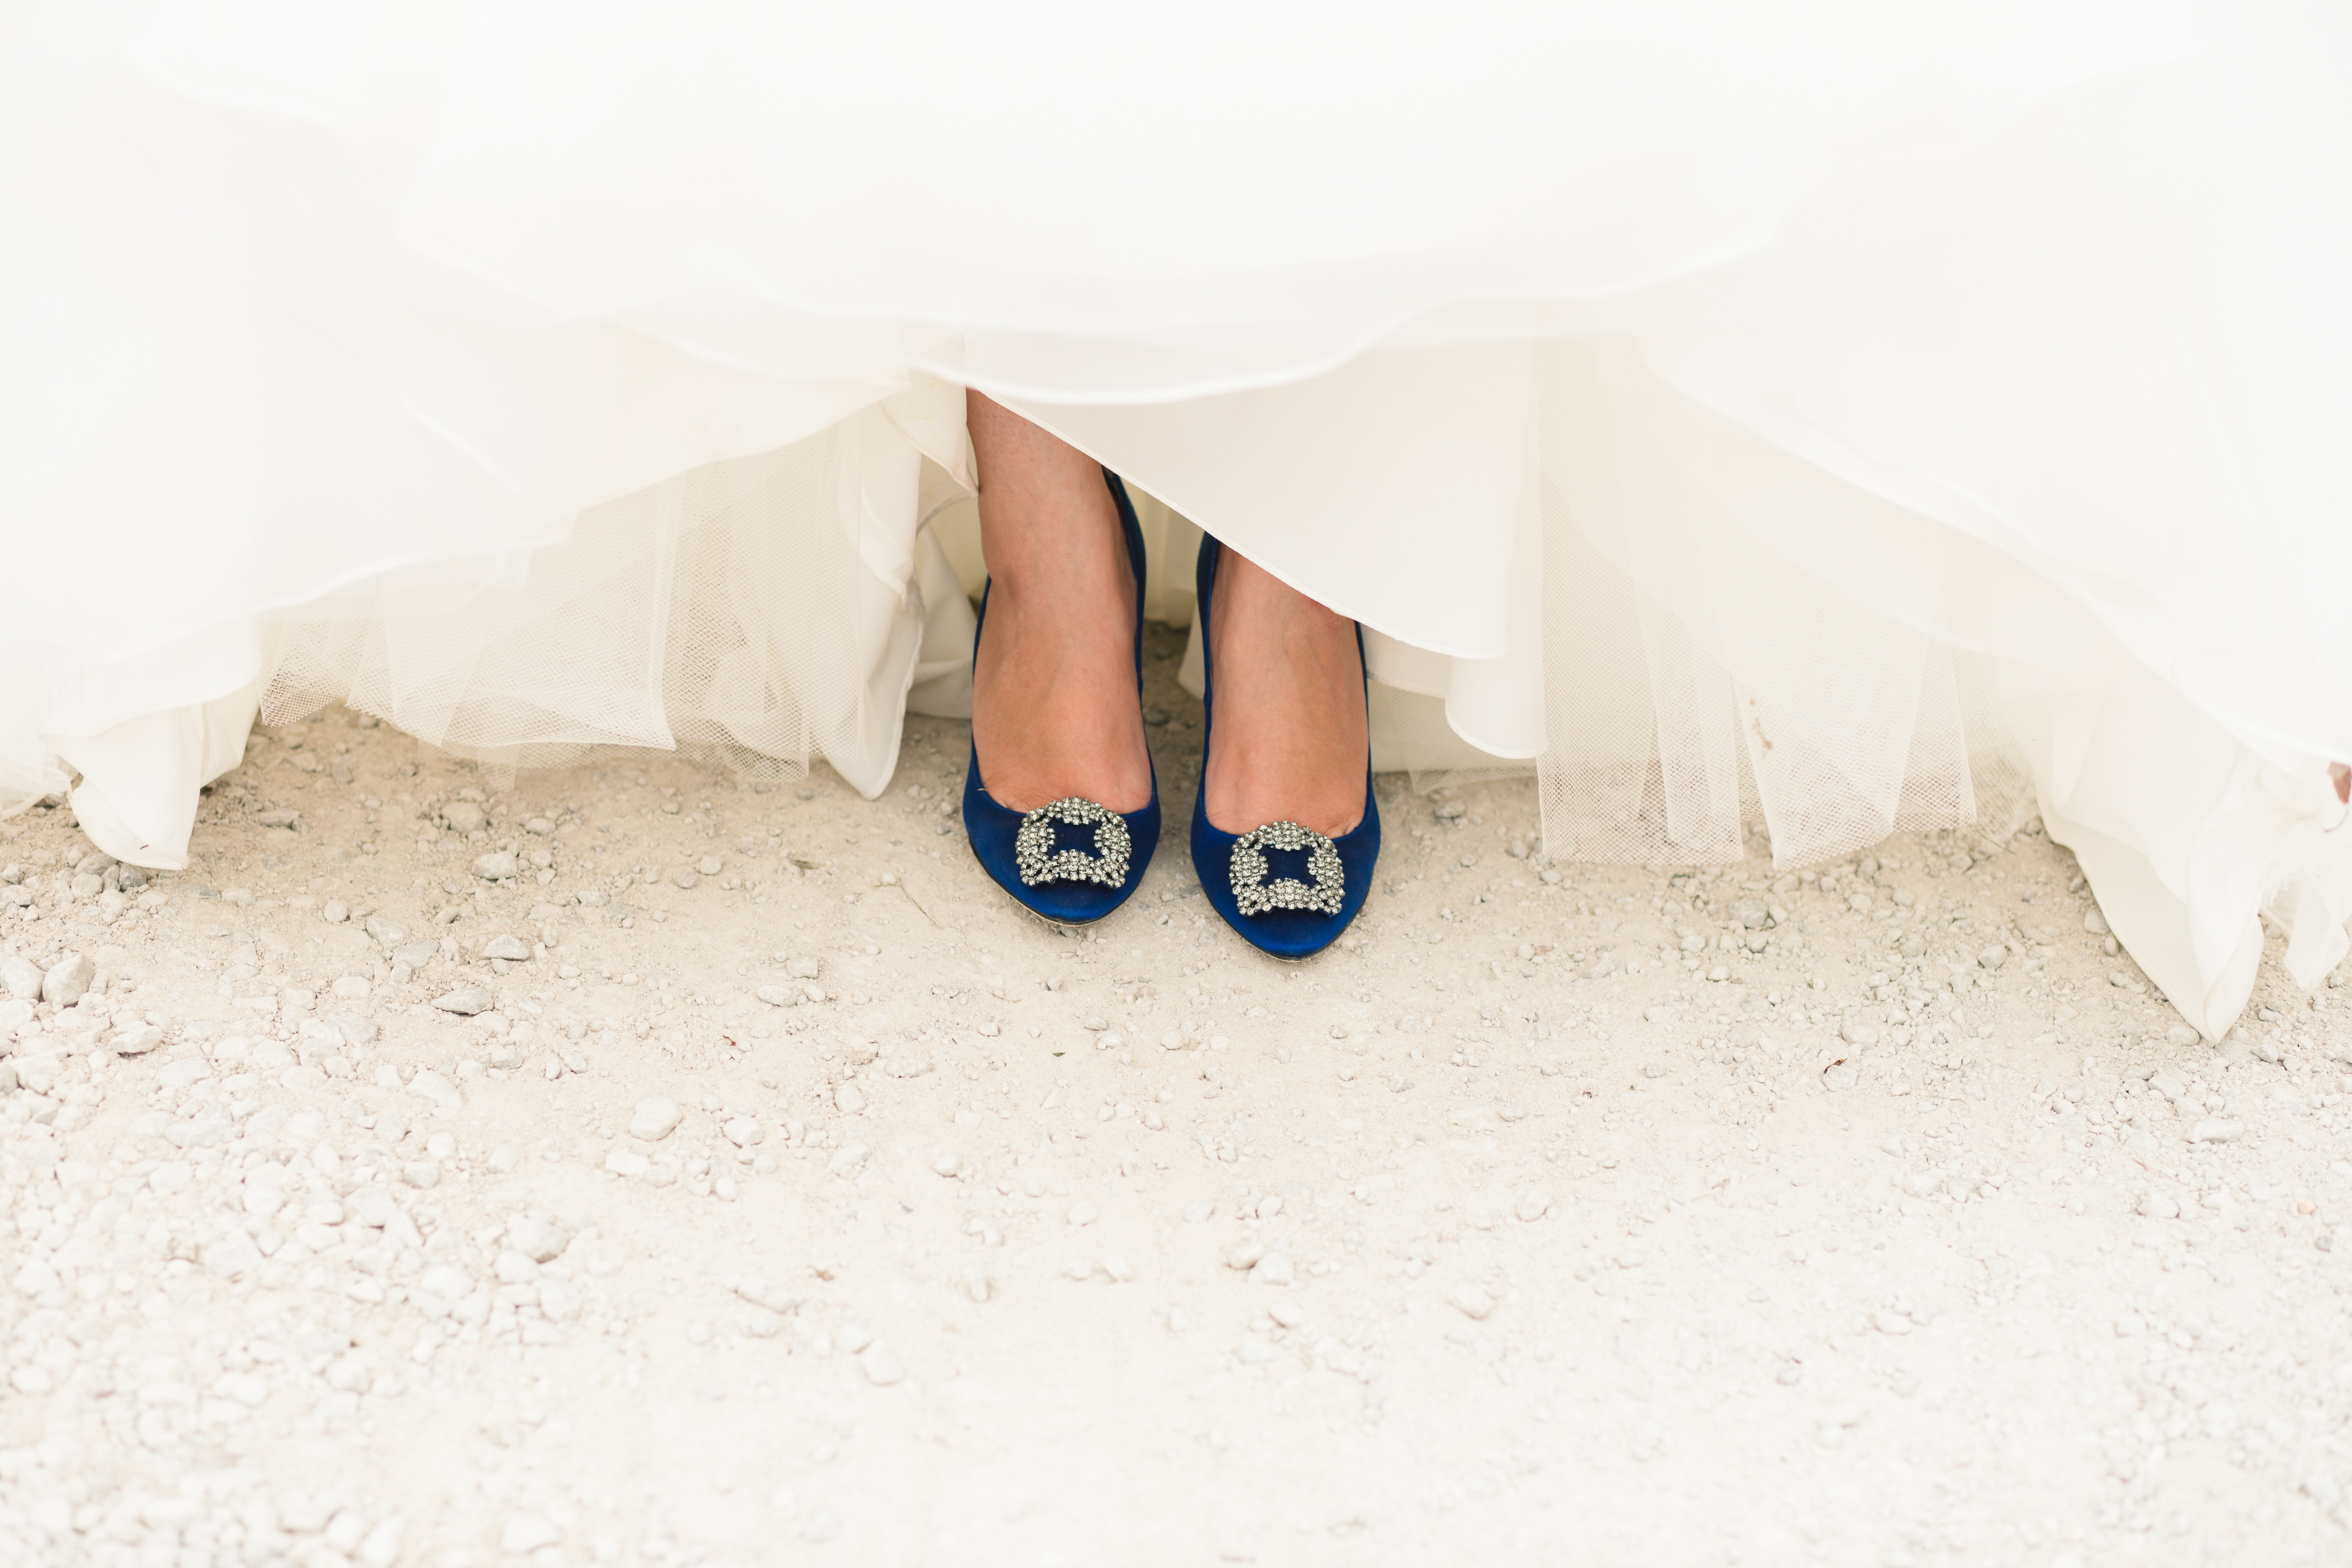 6 Undergarments You Might Want to Wear With Your Wedding Gown